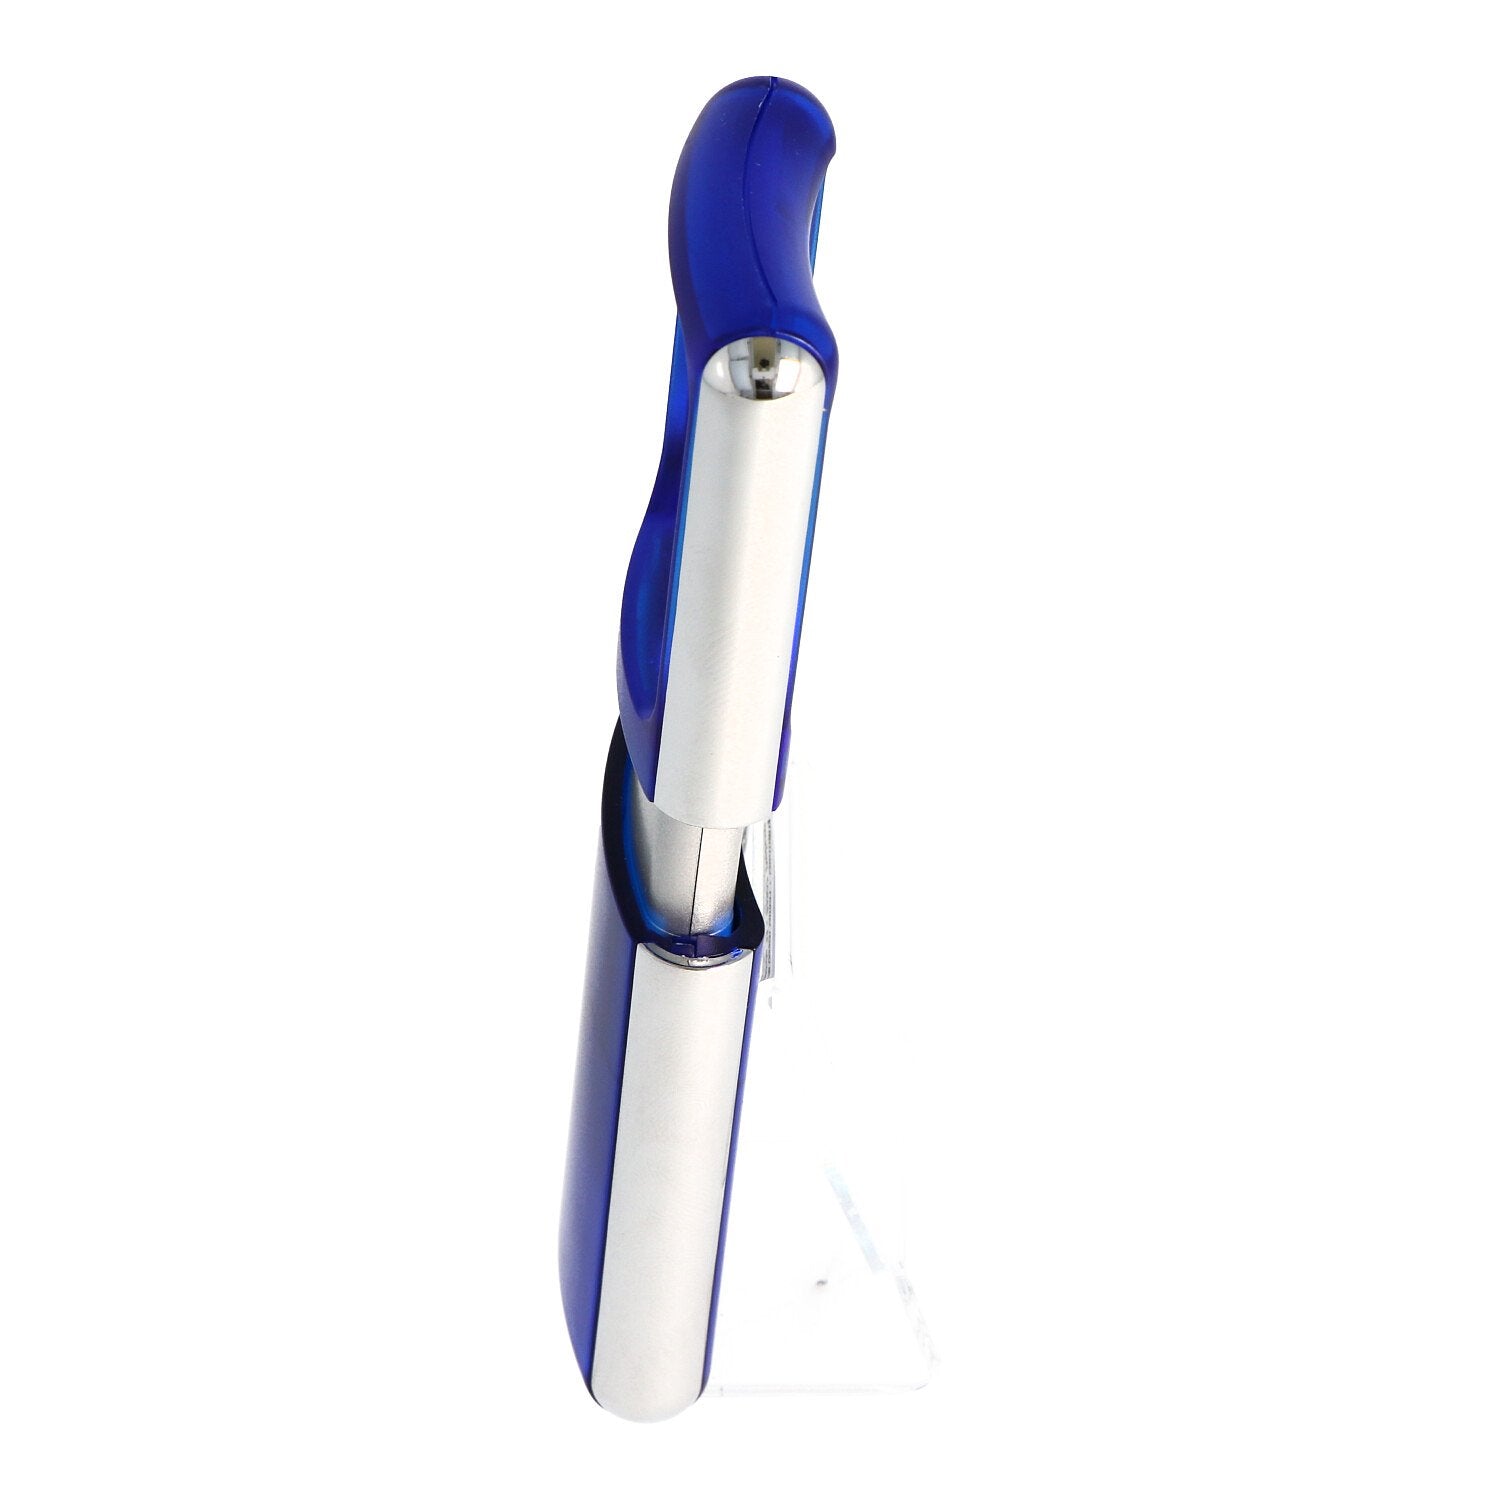 Magnifying glass with LED lighting and 3x magnification, color blue, in blister packaging